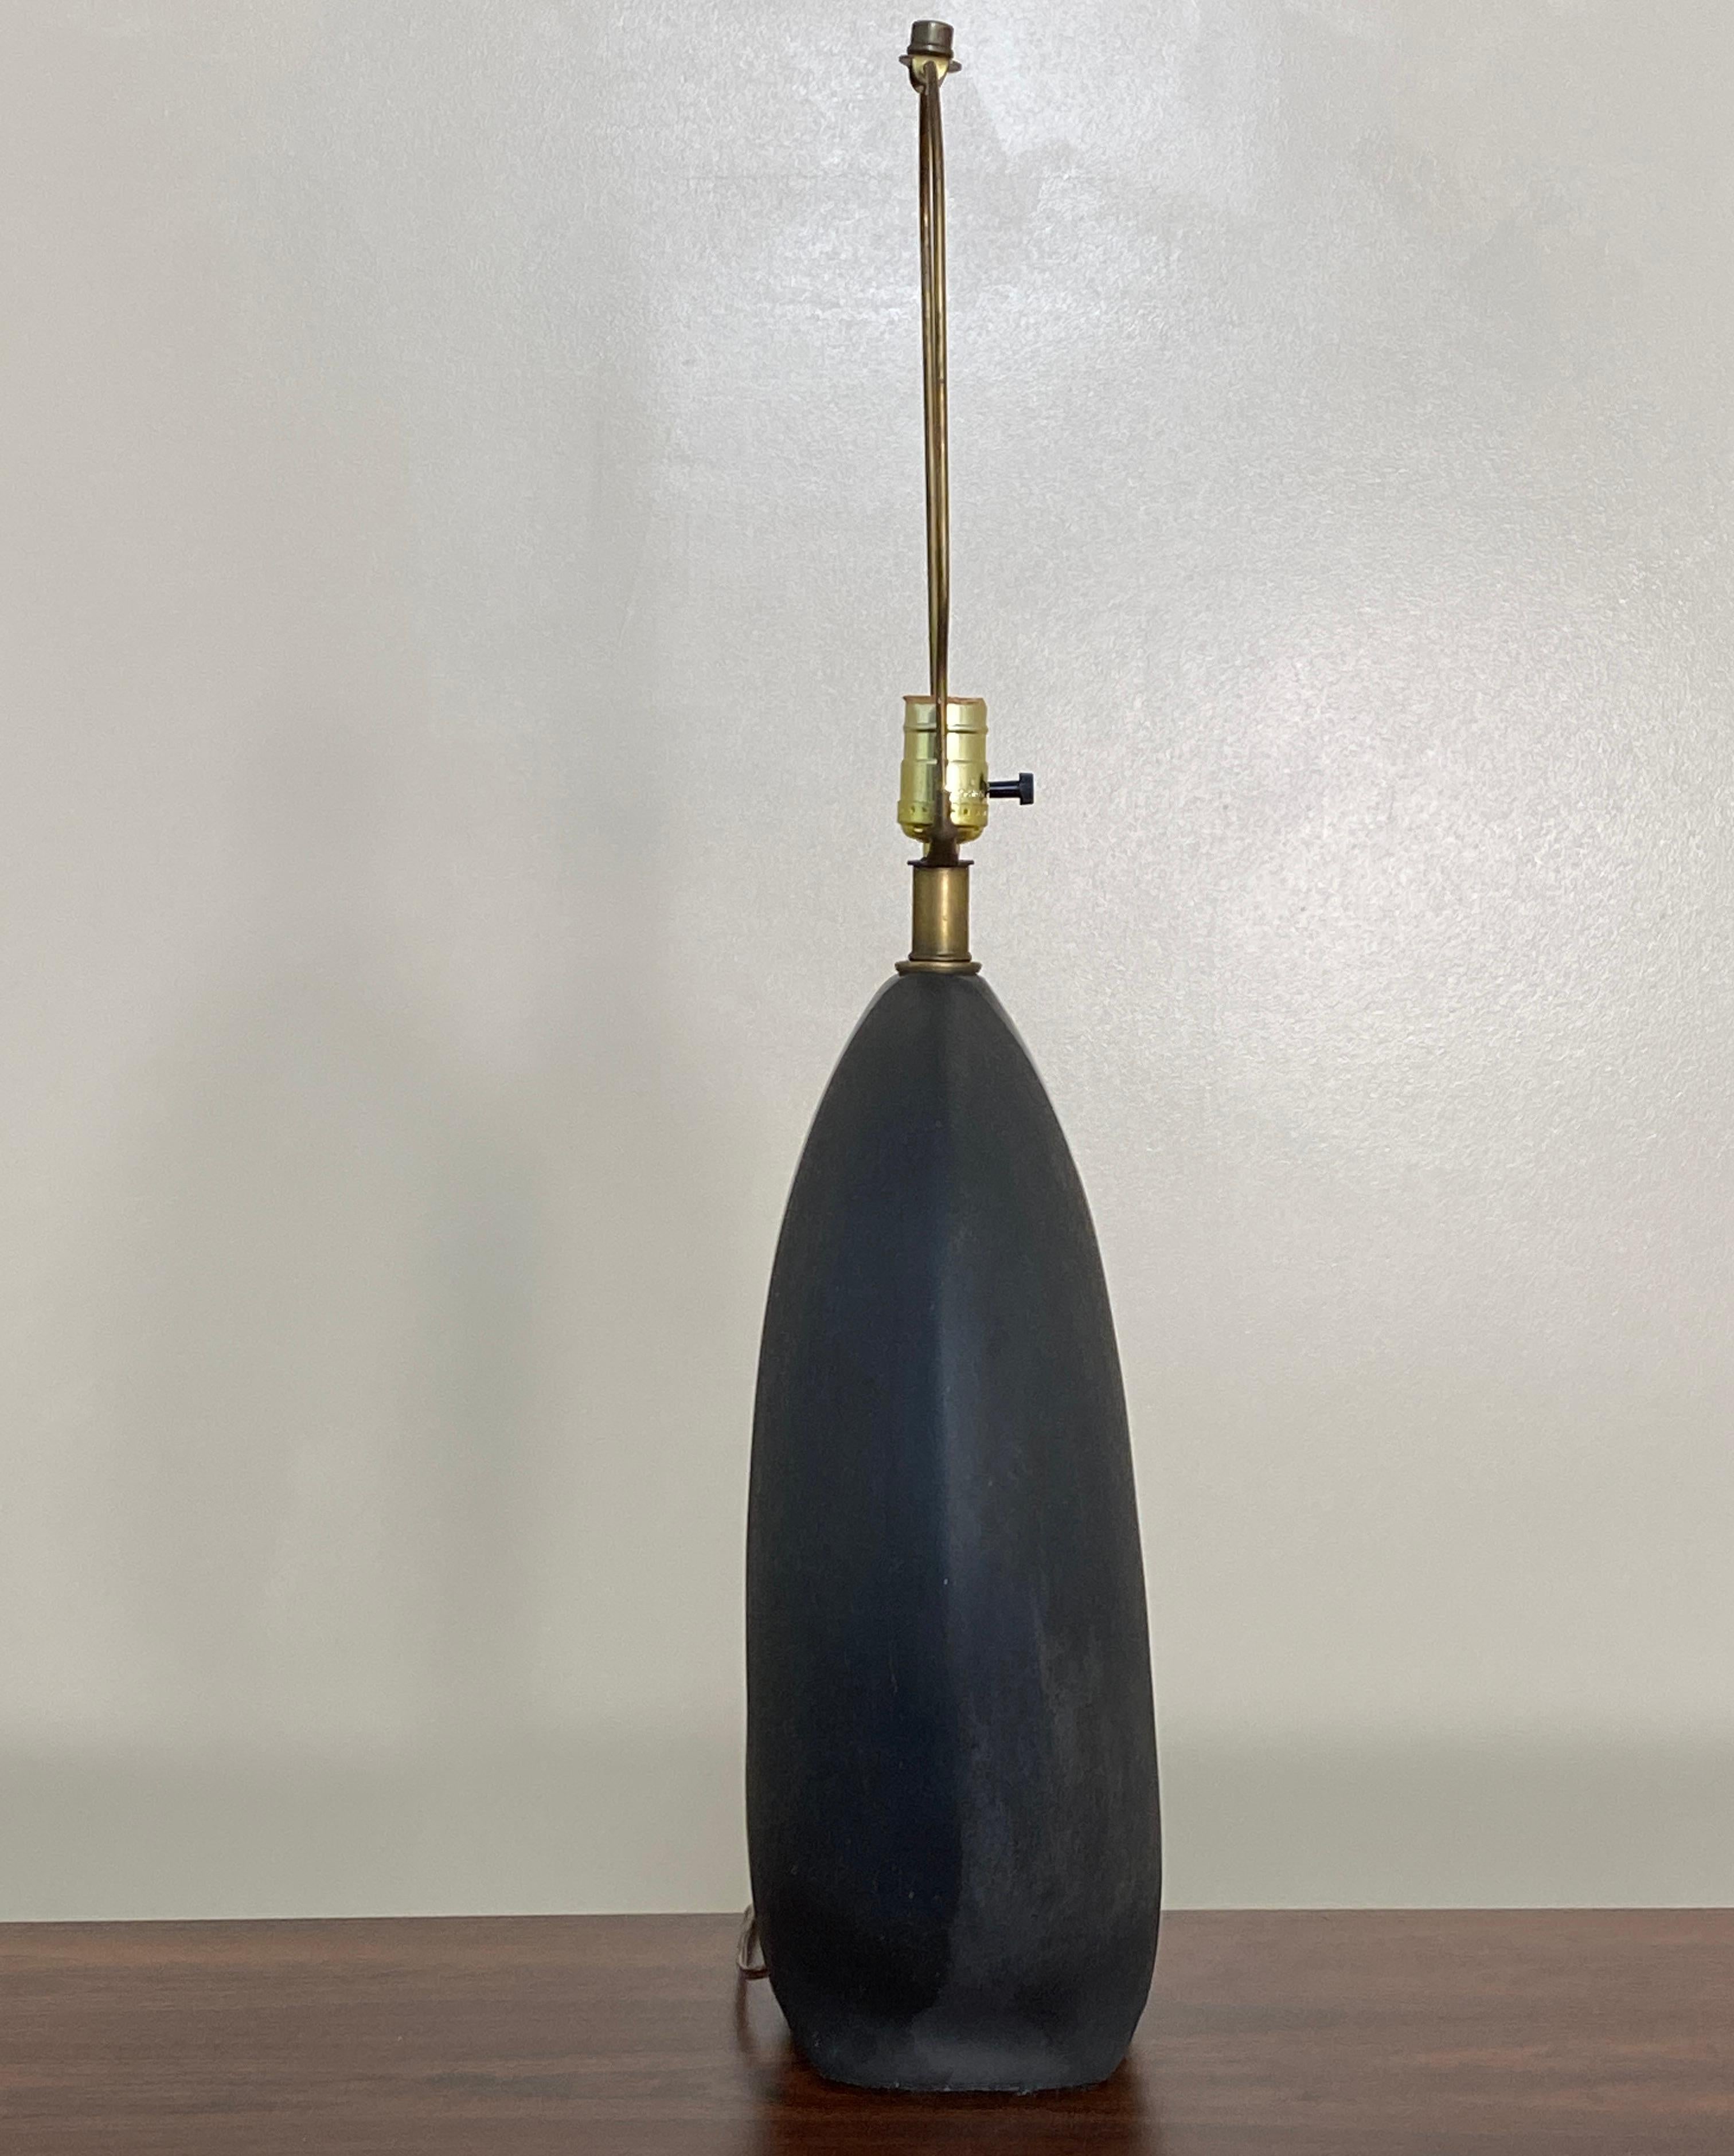 Obsidian Glaze Table Lamp by Markel In Excellent Condition For Sale In South Charleston, WV